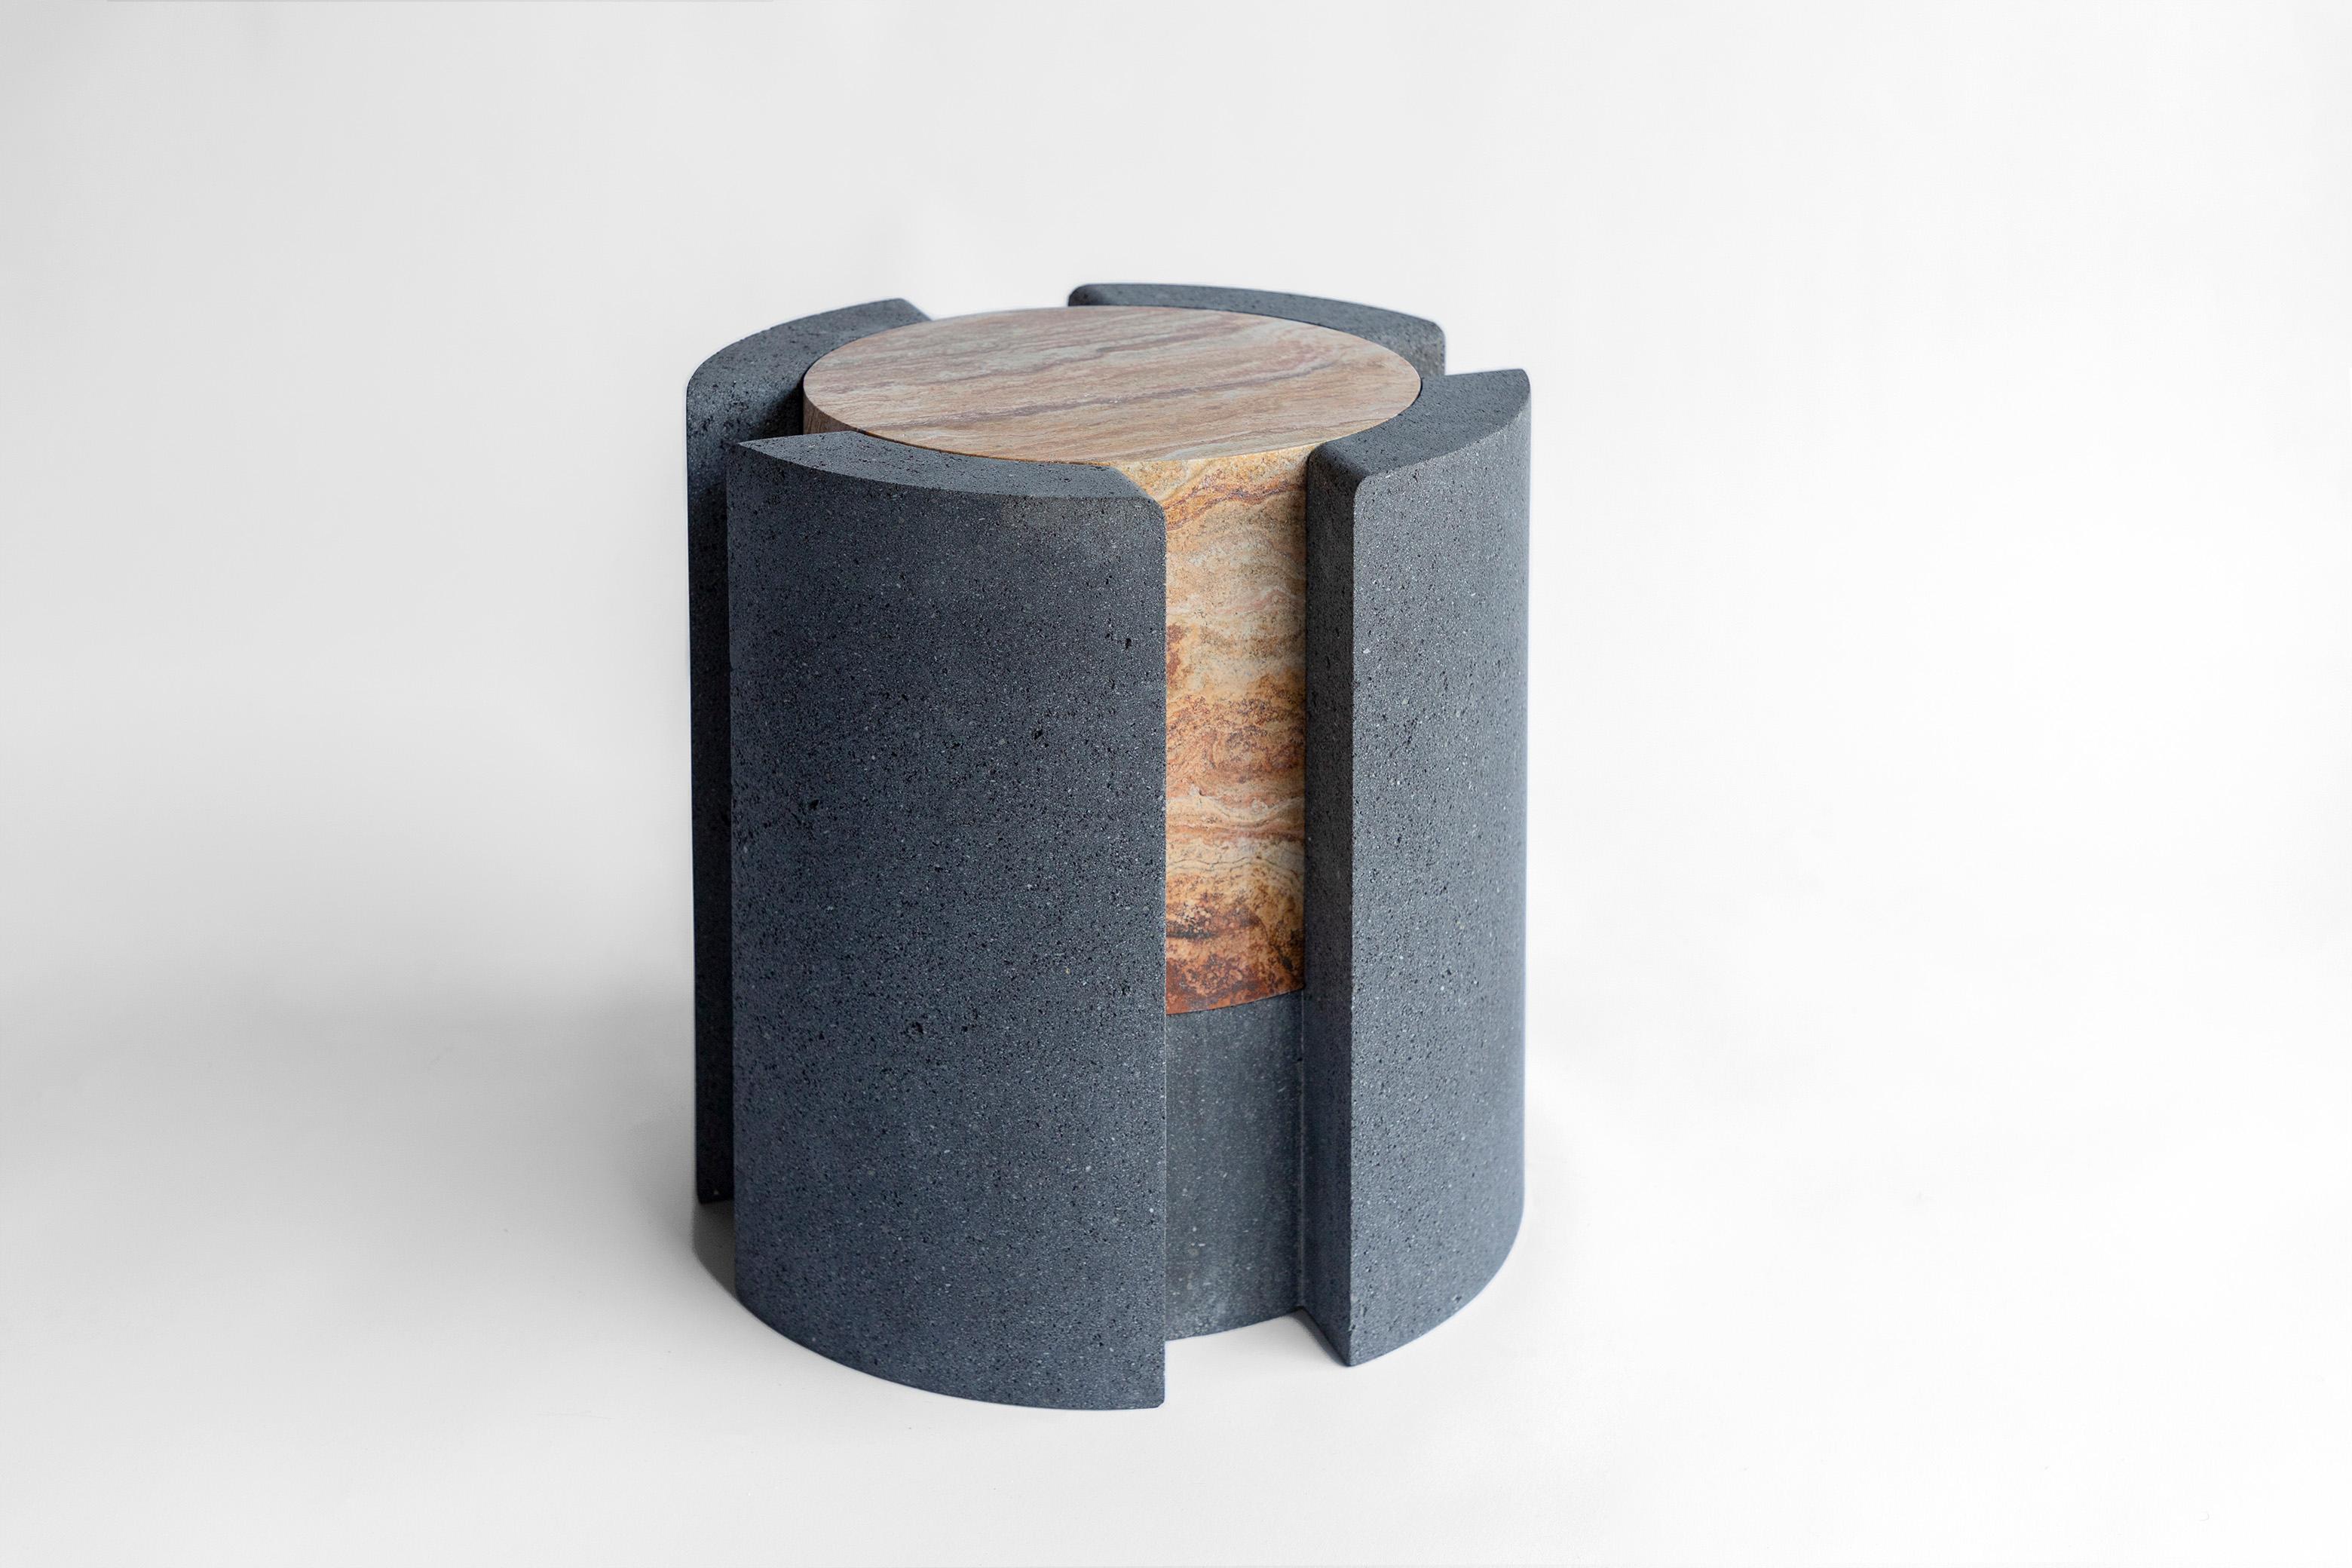 Stone Volcanic Shade III Stool/Table by Sten Studio, Represented by Tuleste Factory